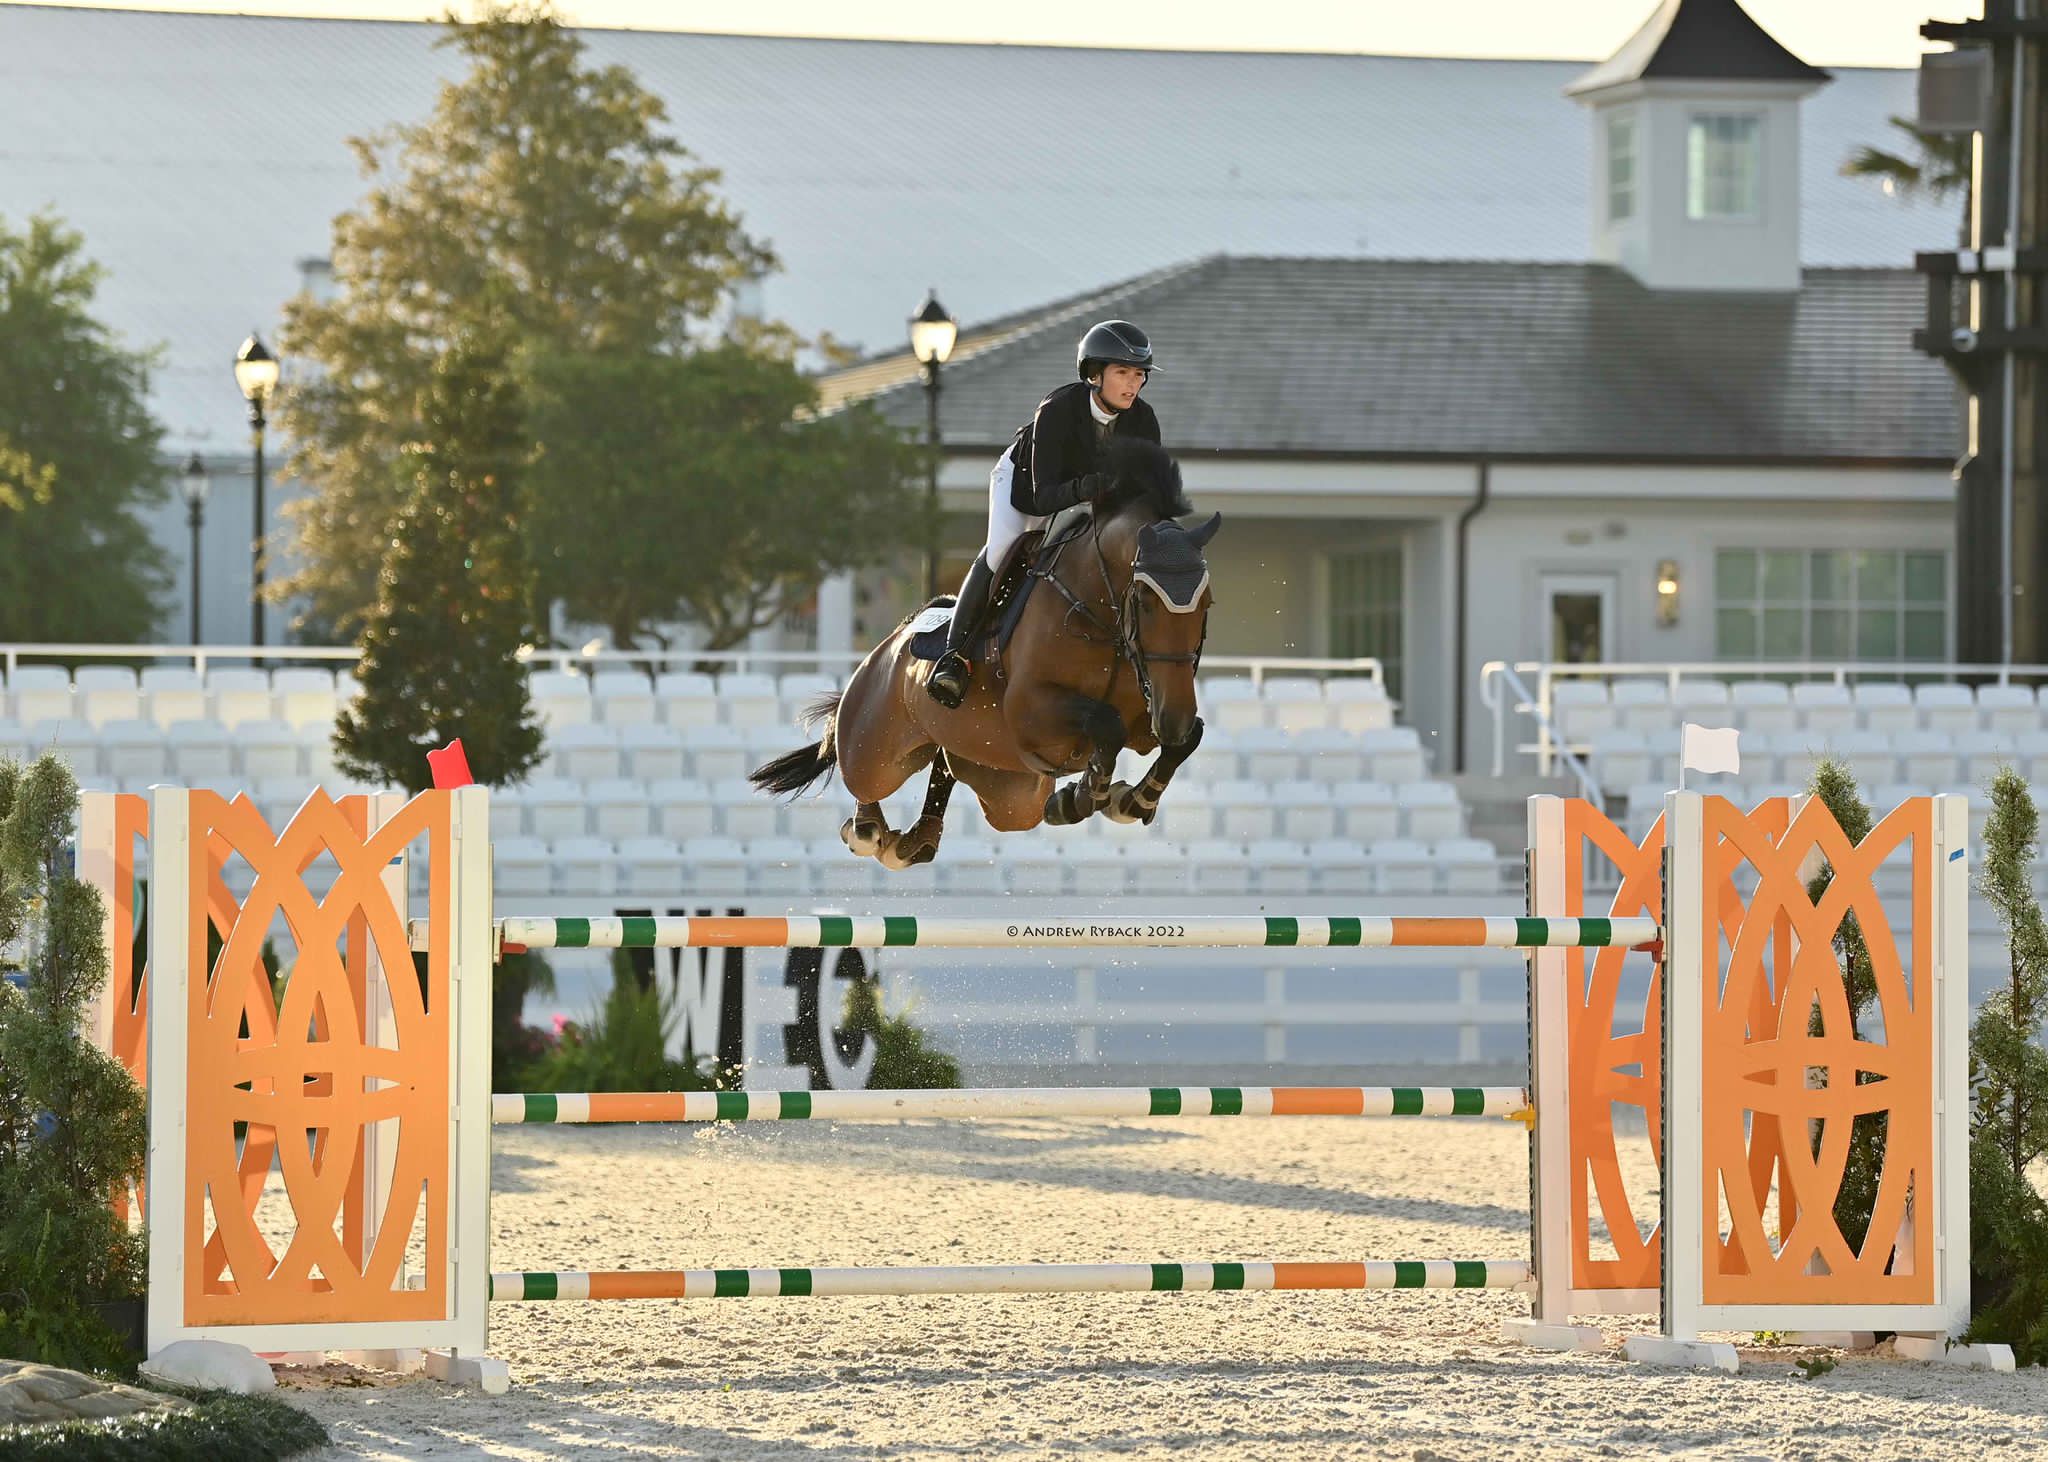 2nd place for Jumpstar Uno and Tanimara Macari in the High’s at WEC Ocala